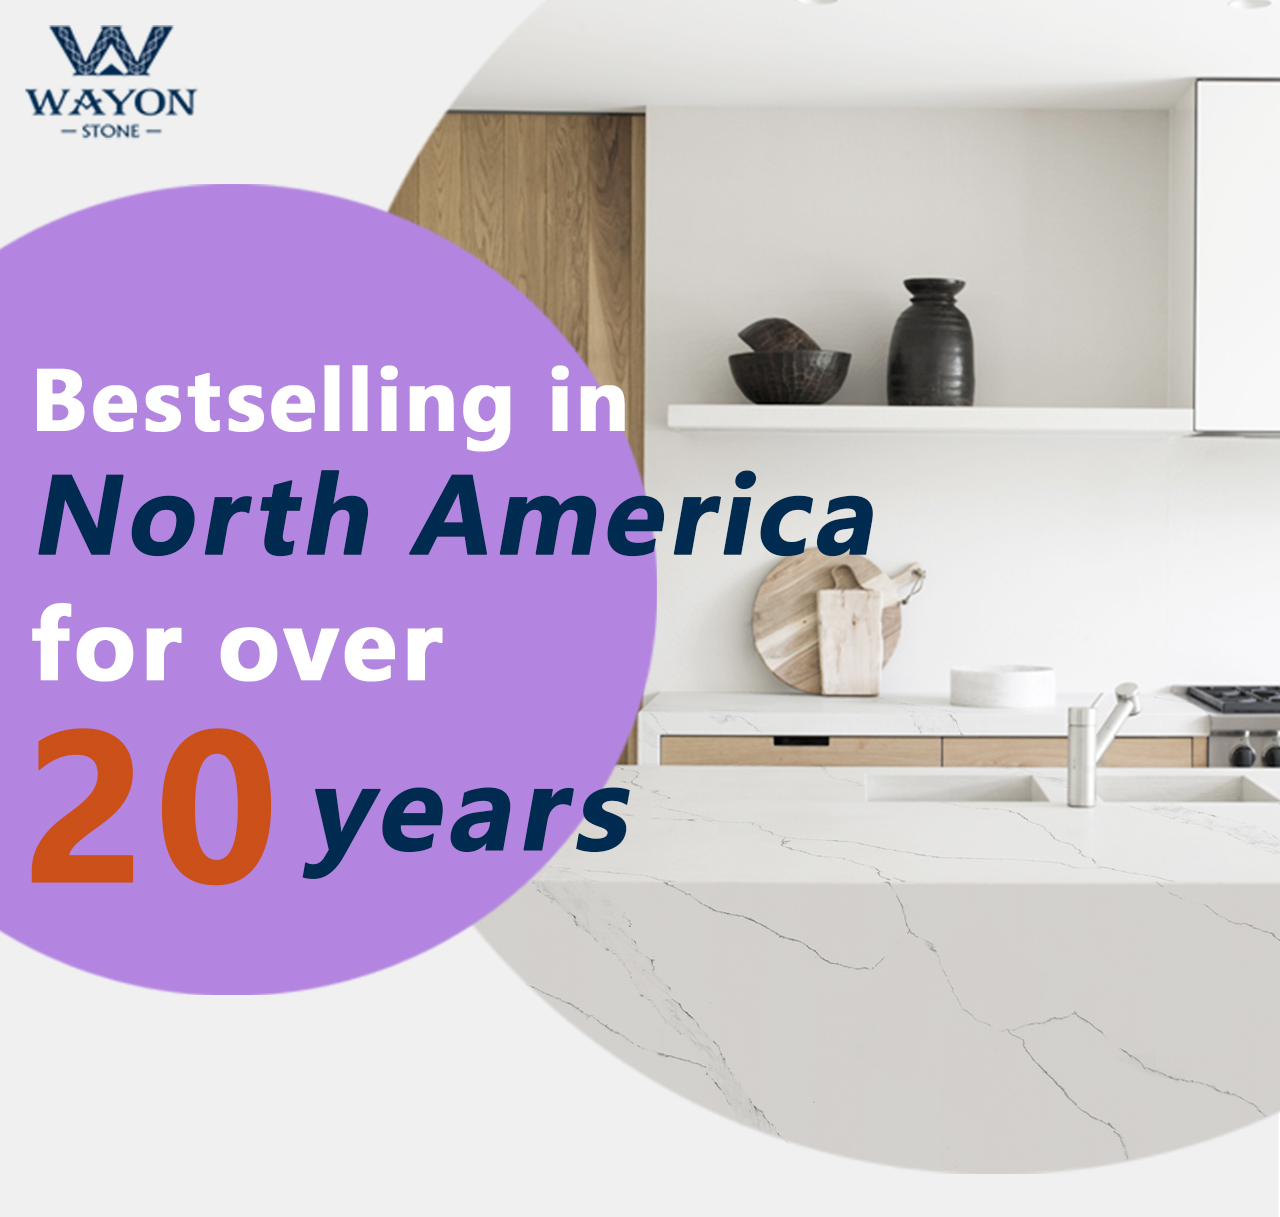 Wayon Stone bestselling in North America for more than 20 years